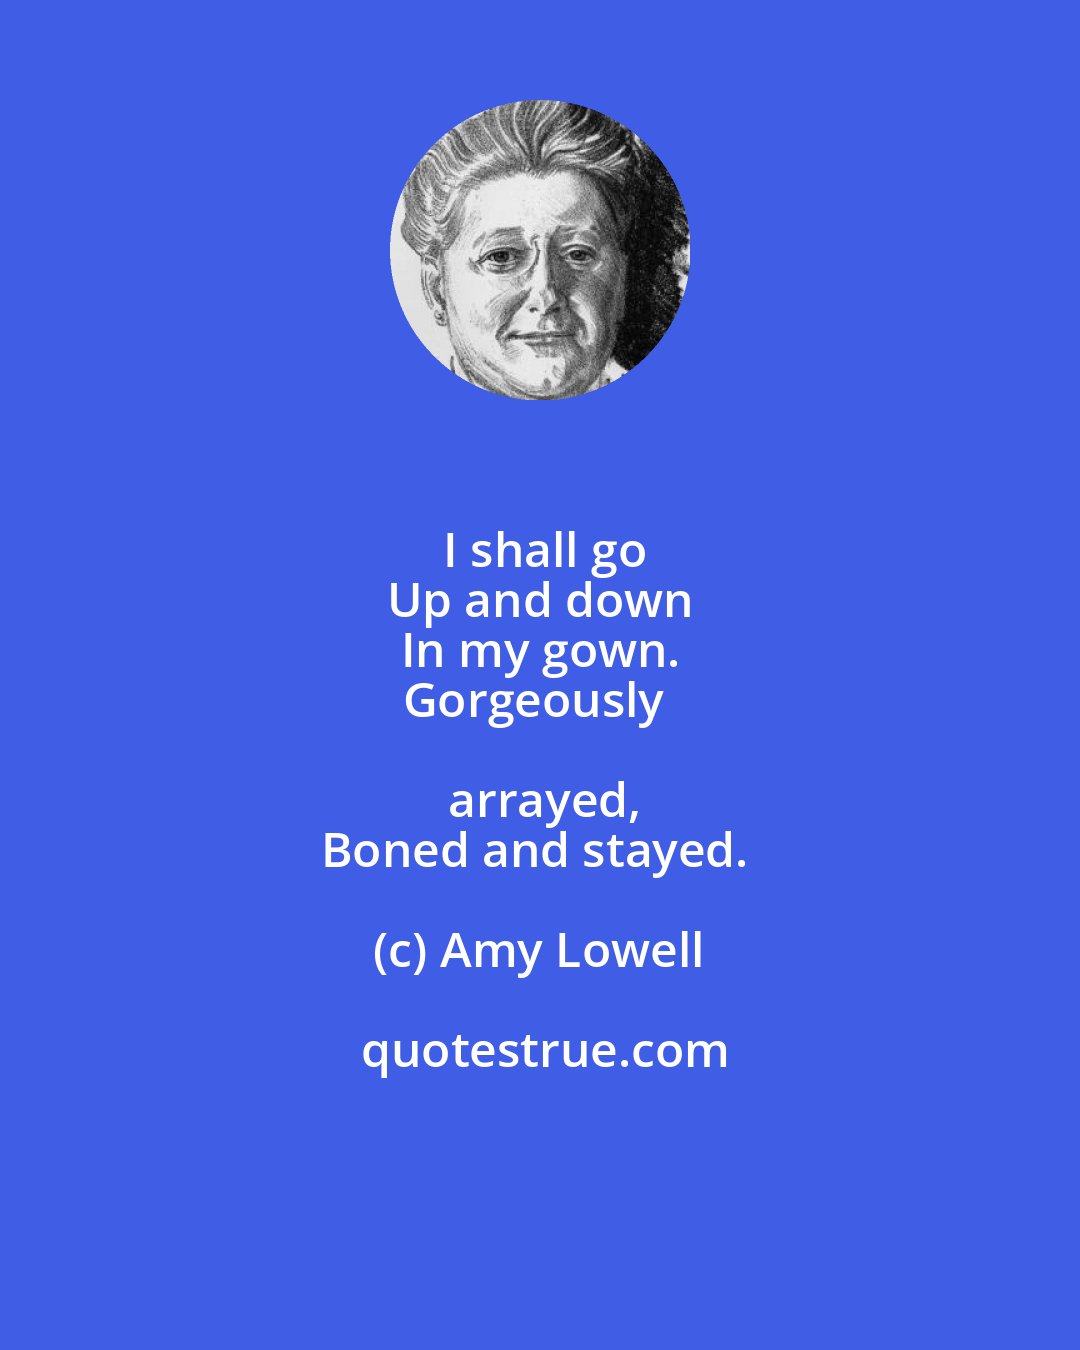 Amy Lowell: I shall go
Up and down
In my gown.
Gorgeously arrayed,
Boned and stayed.